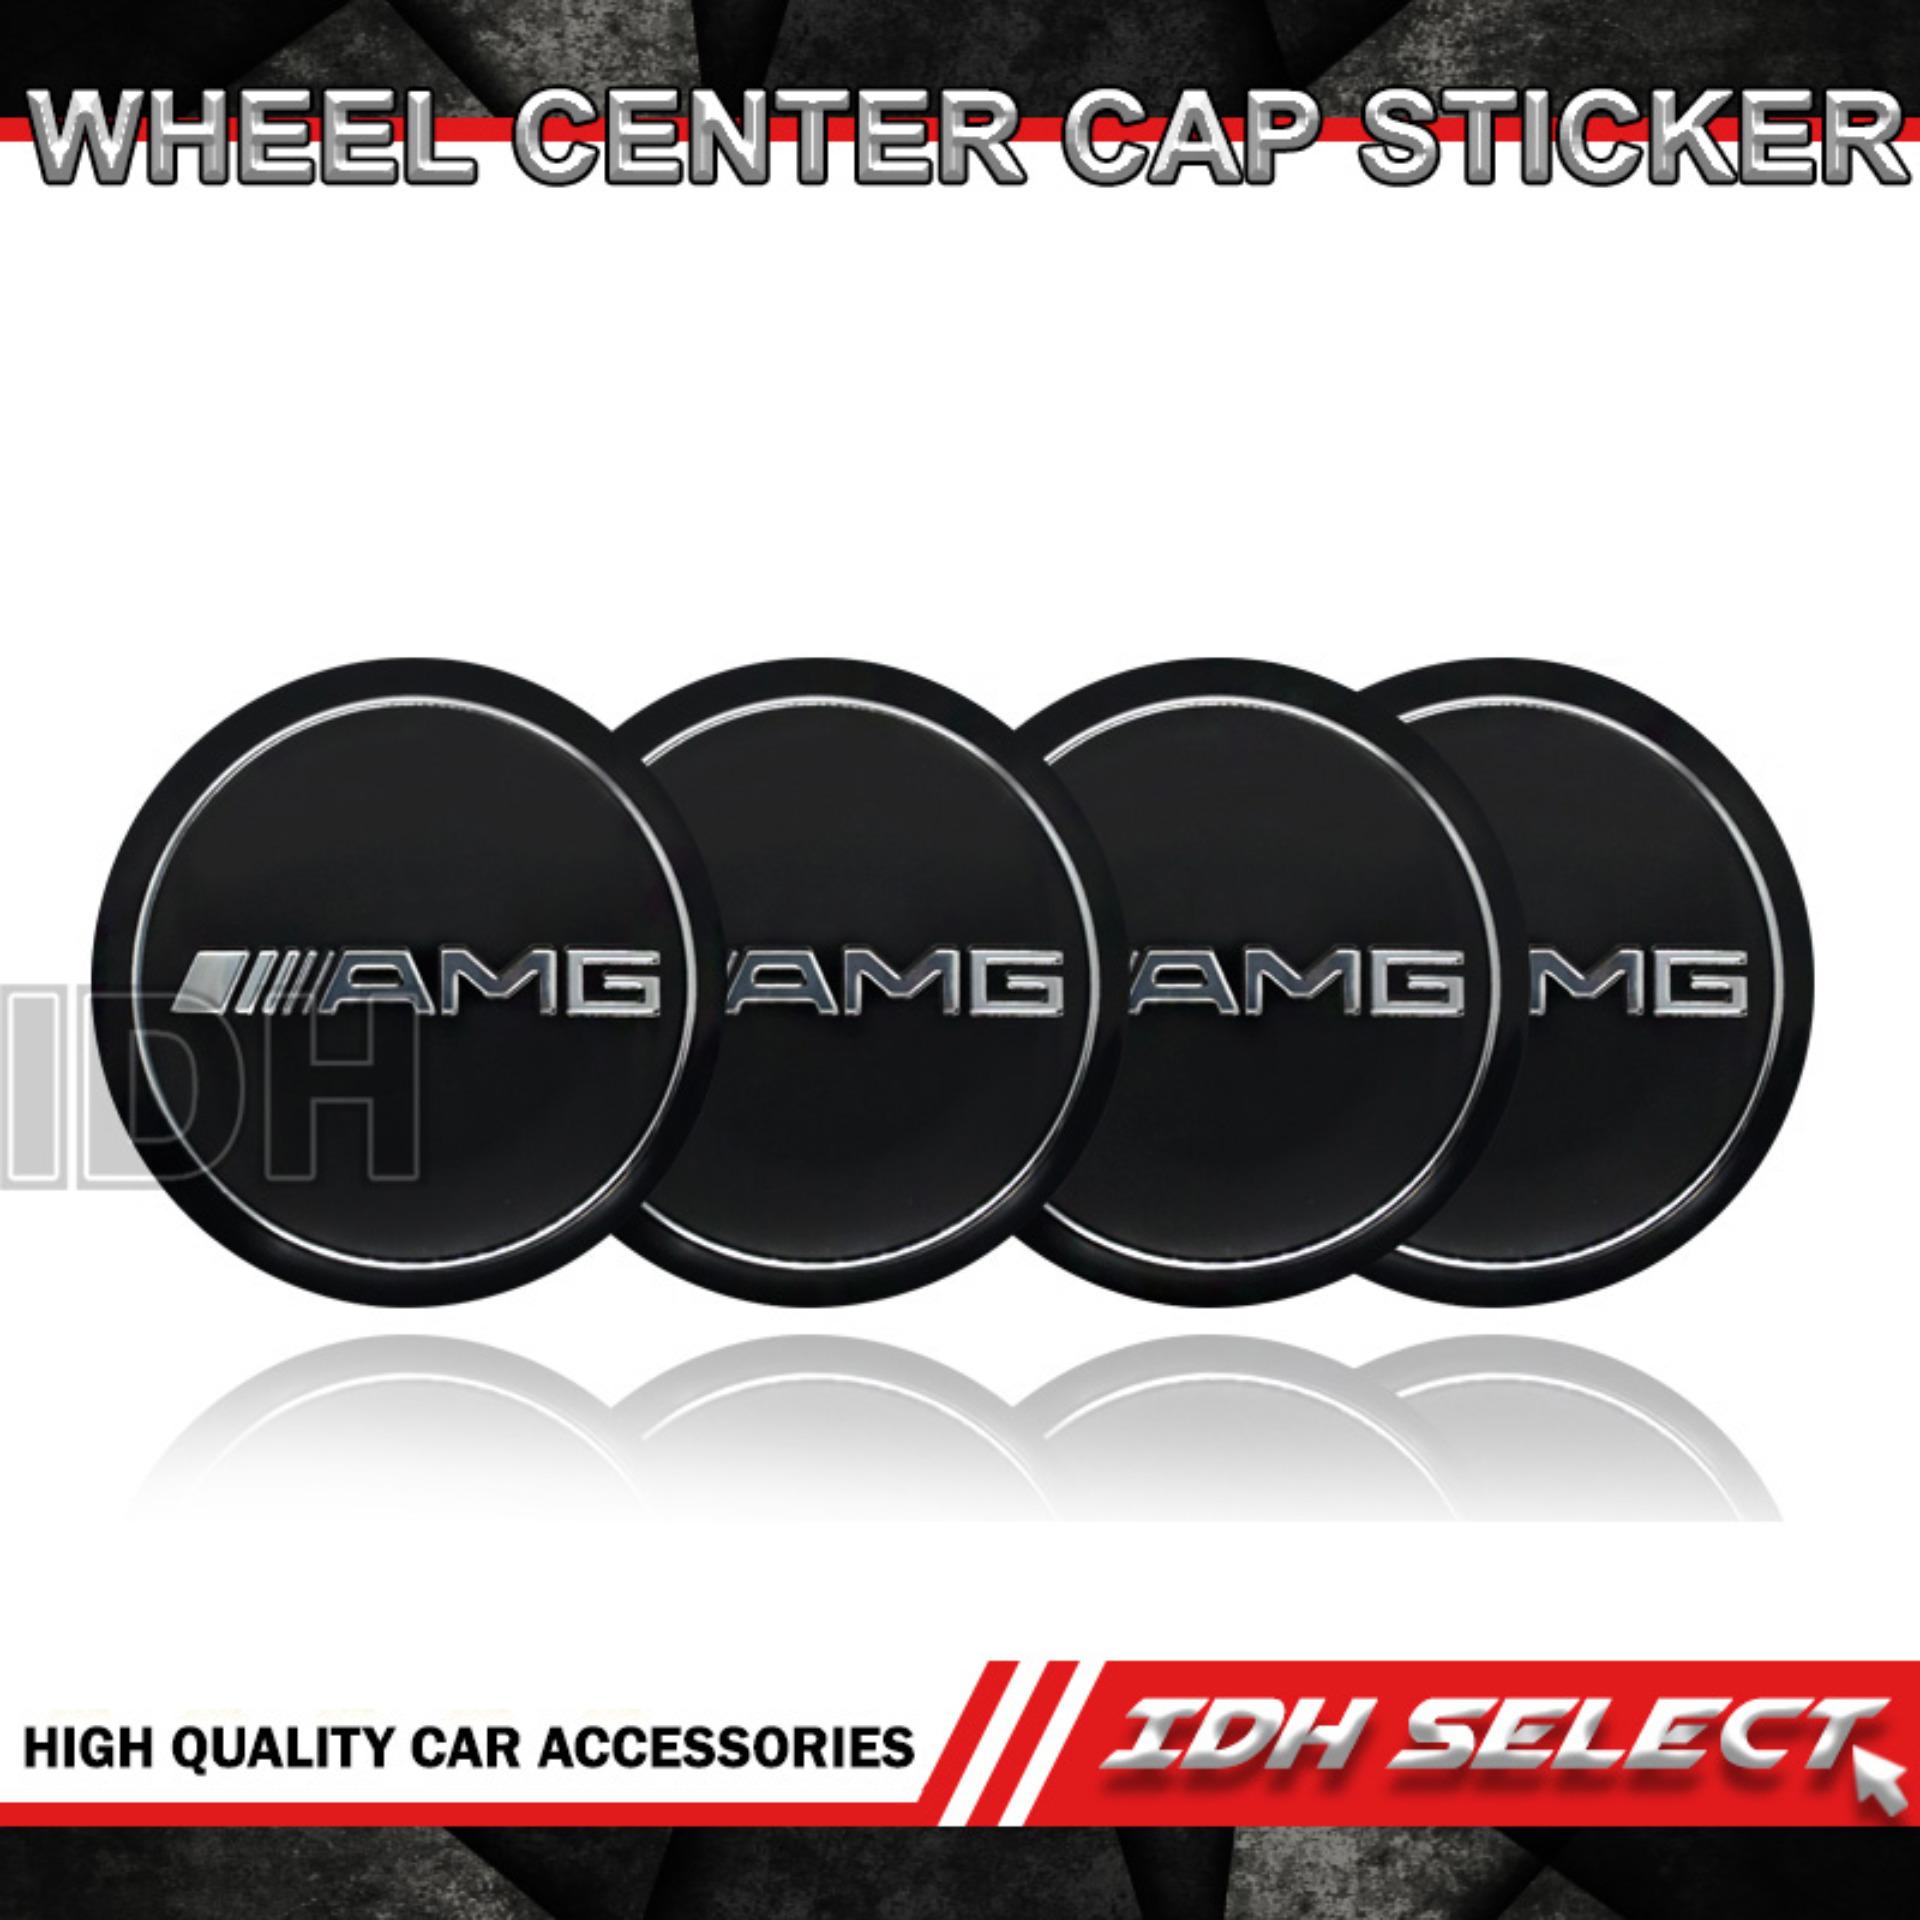 Mugen Power Car Wheel Center Cap Badge Aluminum Metal Sticker Wc-Mug-1 IDH  Select [Car Accessories Local Seller Faster Shipping Available On Hand]